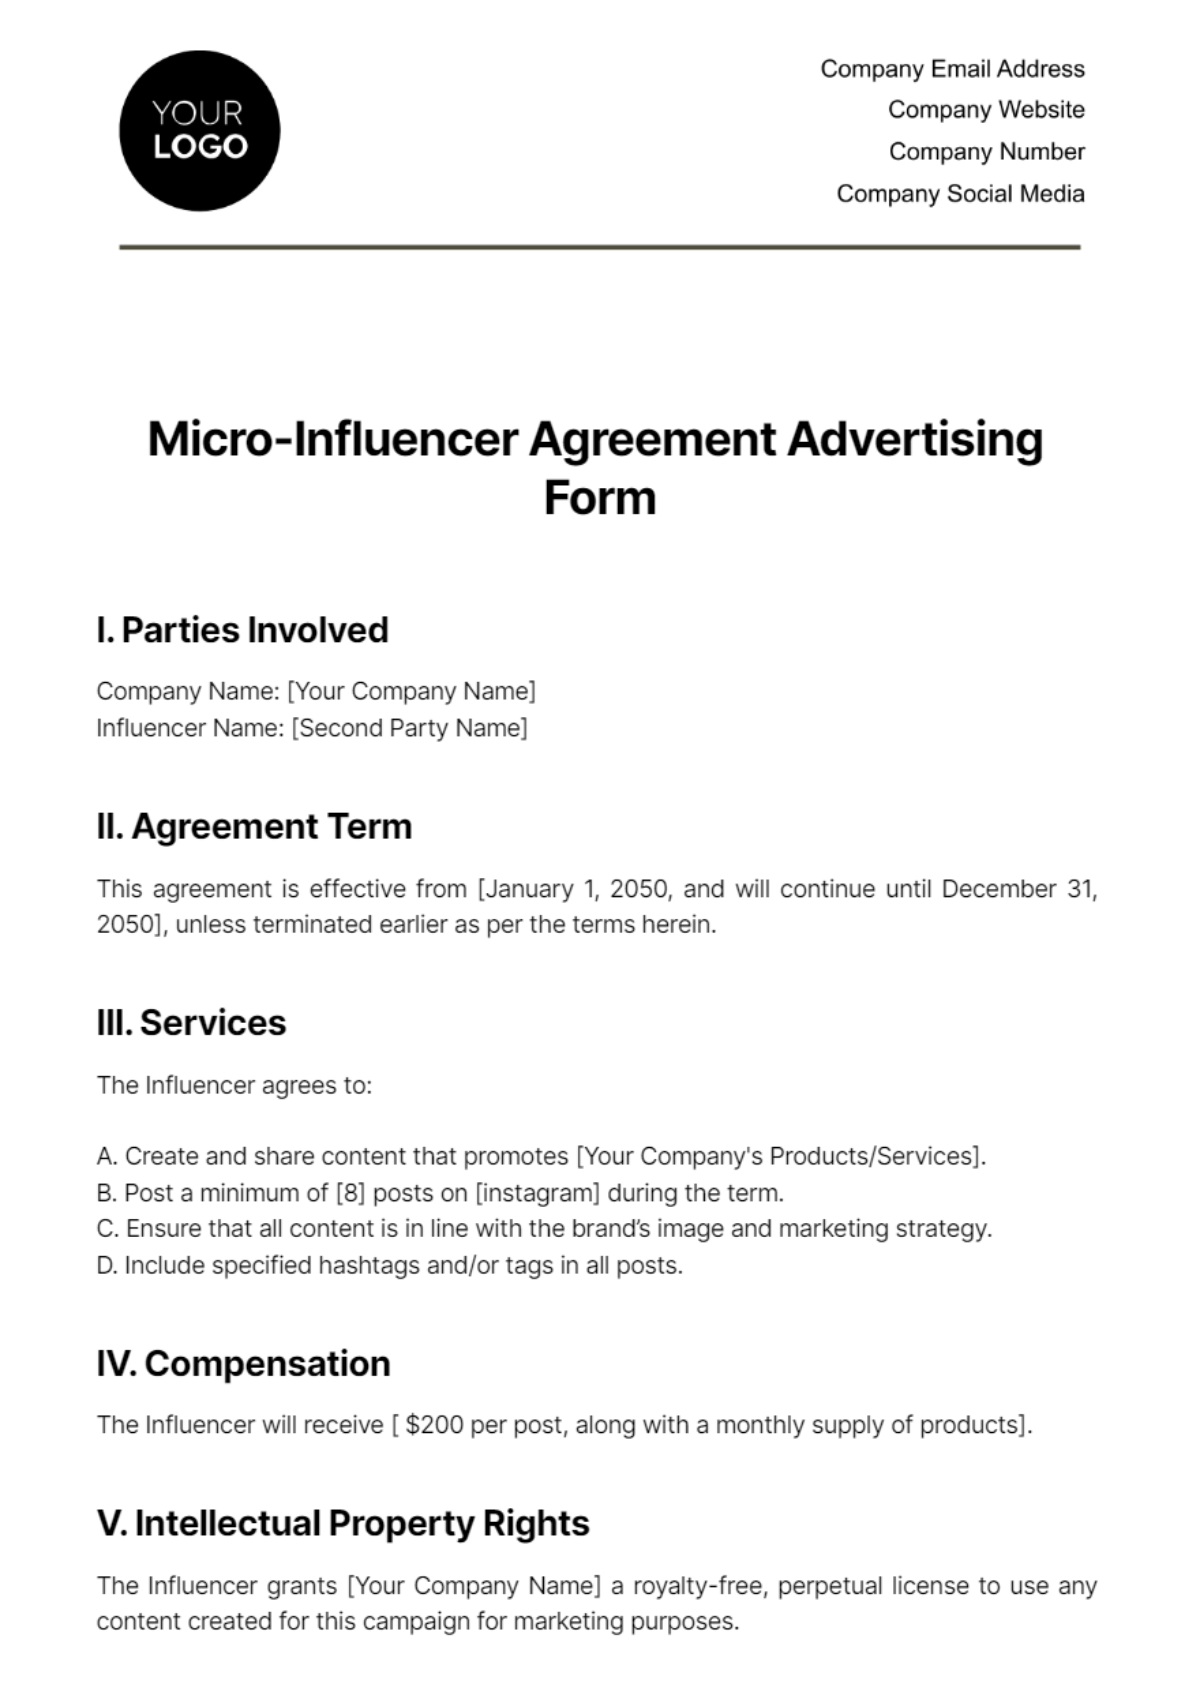 Free Micro-Influencer Agreement Advertising Form Template